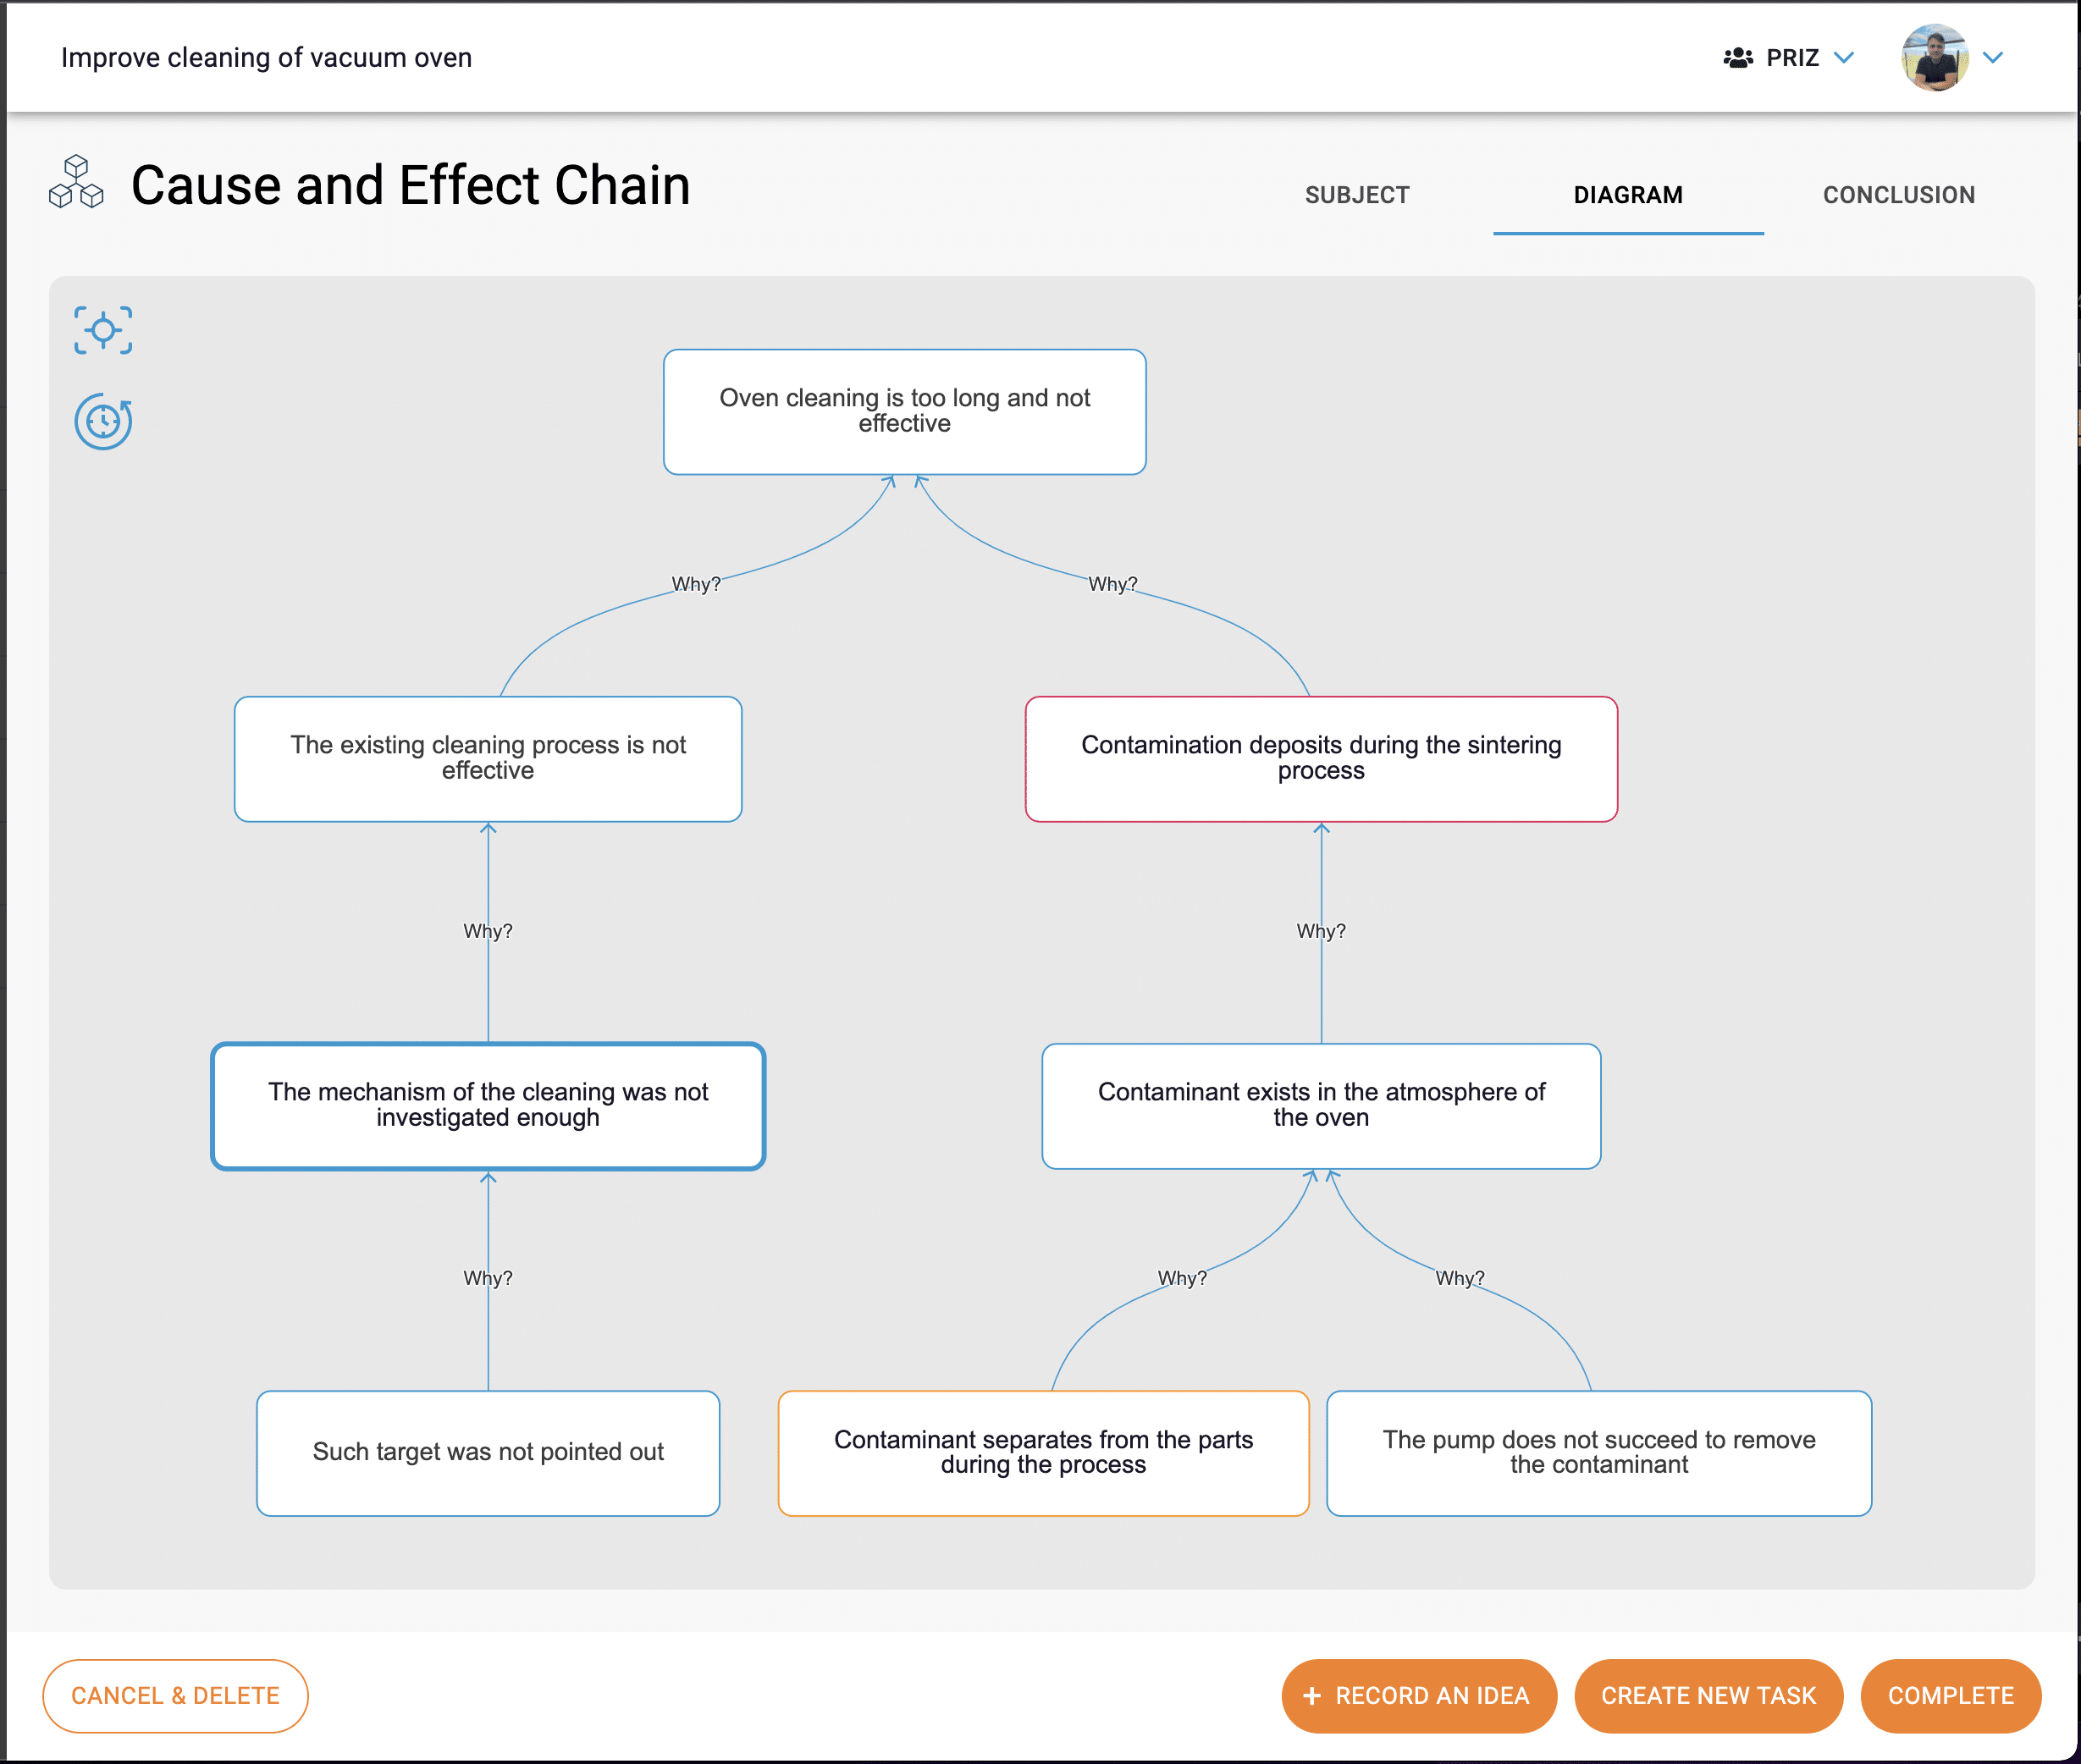 Completed cause and effect chain tree diagram